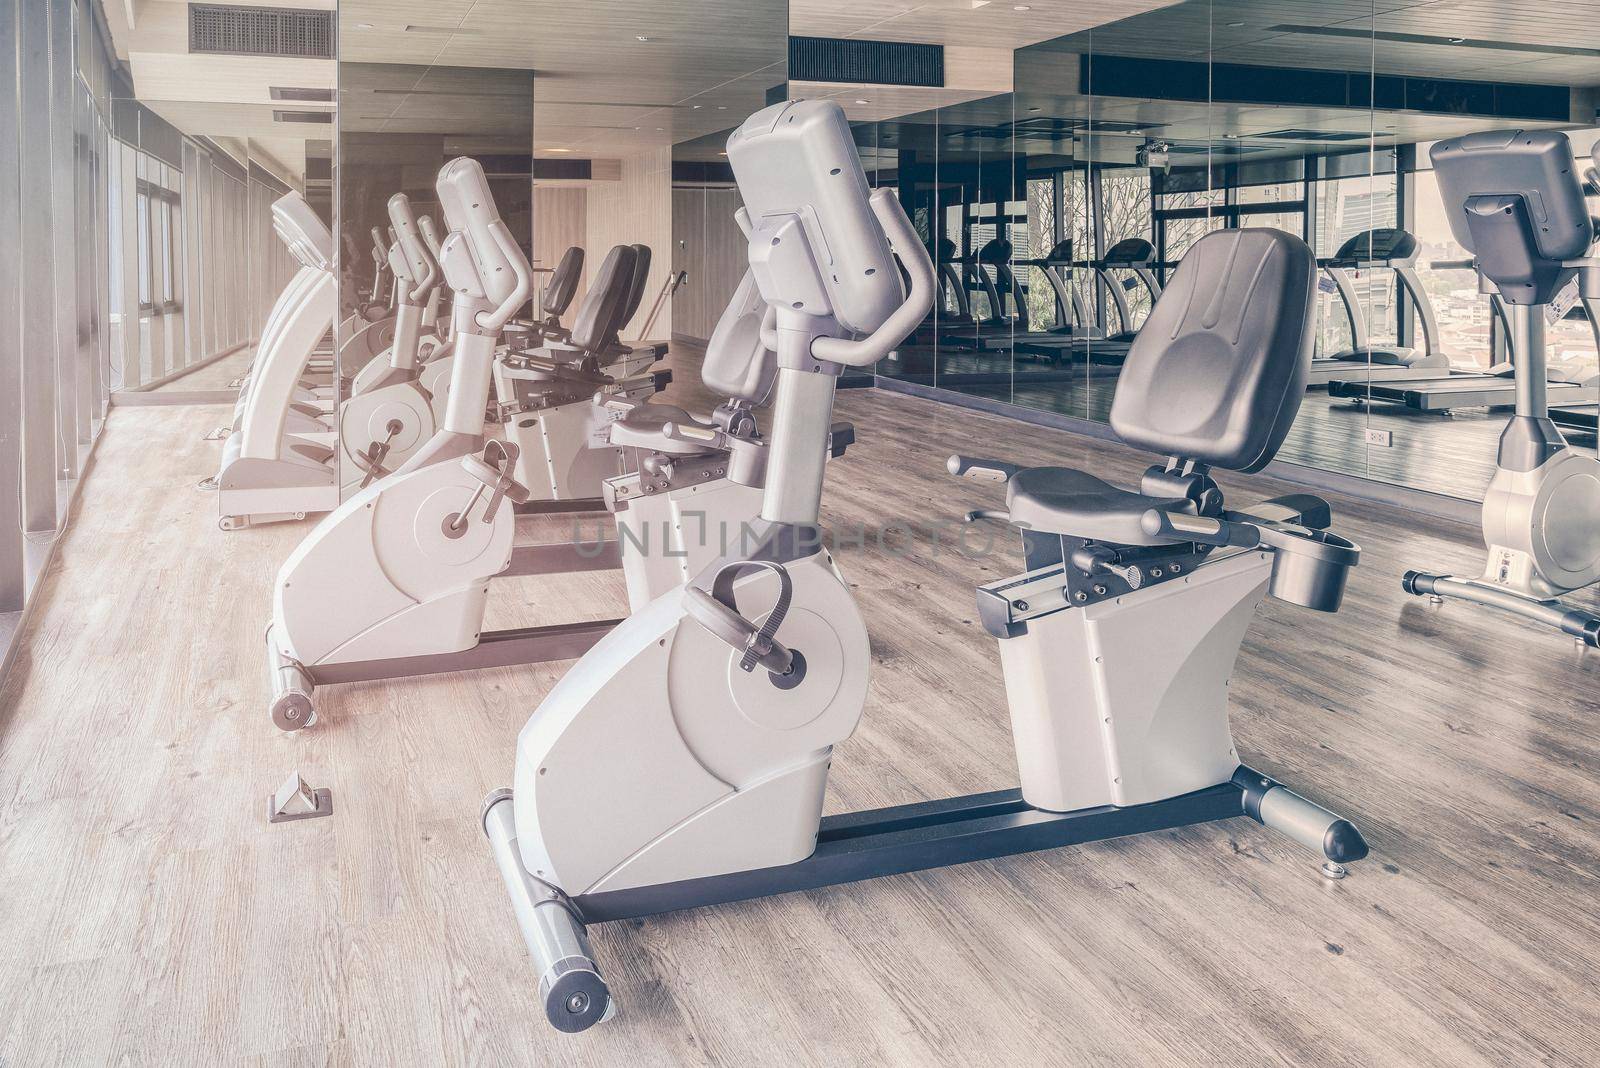 Fitness gym with the modern sport equipment. Fitness gym is a modern lifestyle for sport workout  by Nuamfolio